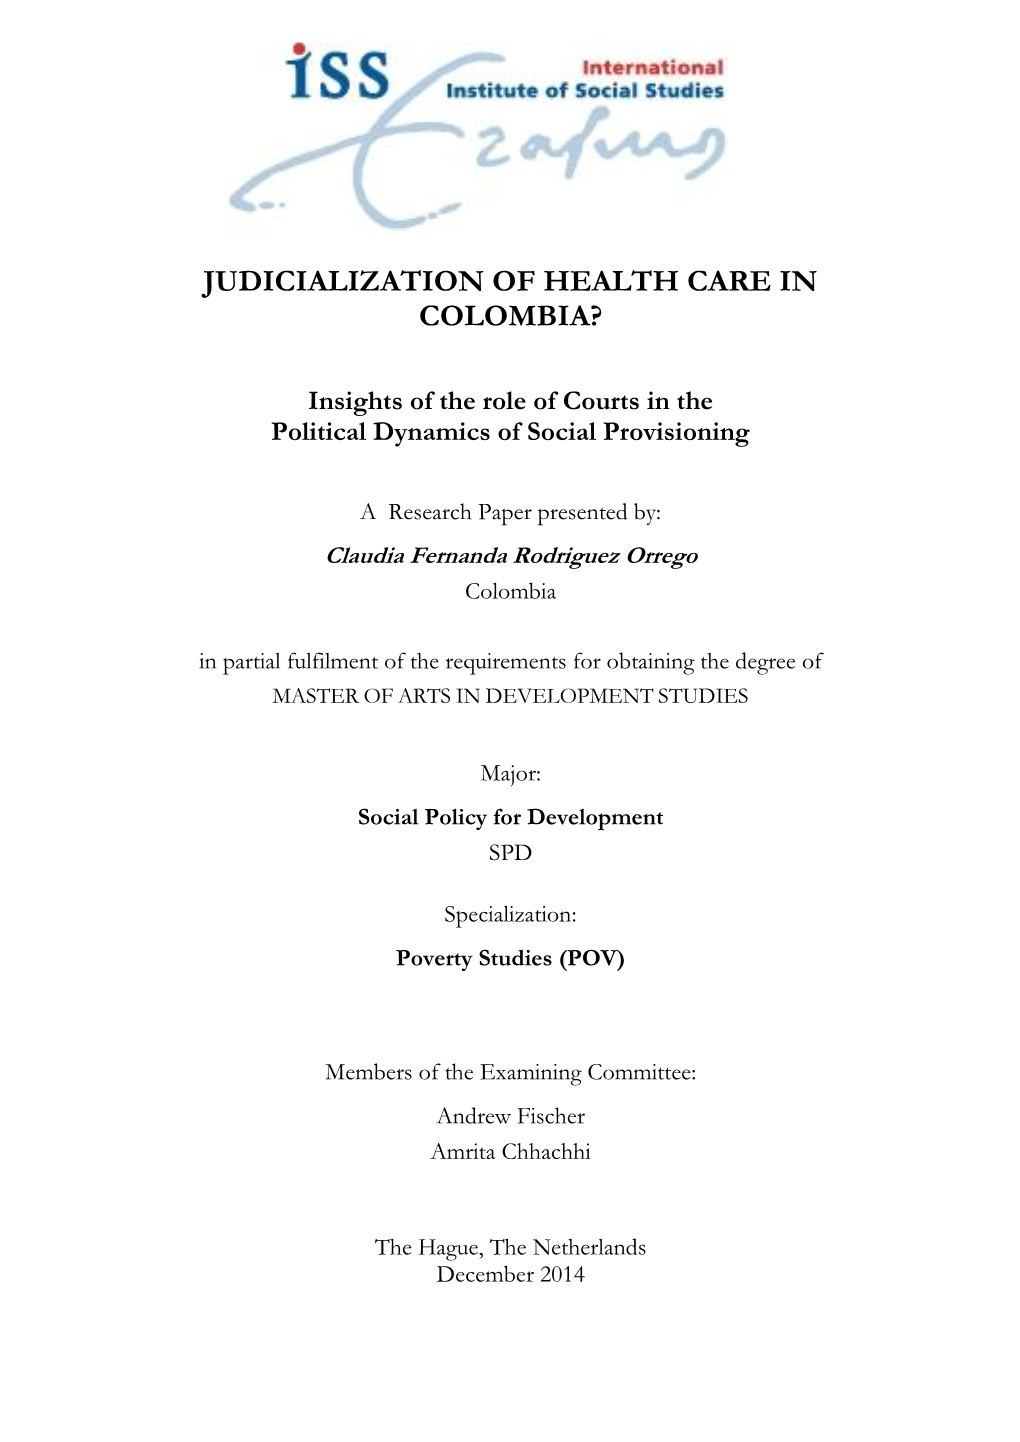 Judicialization of Health Care in Colombia?